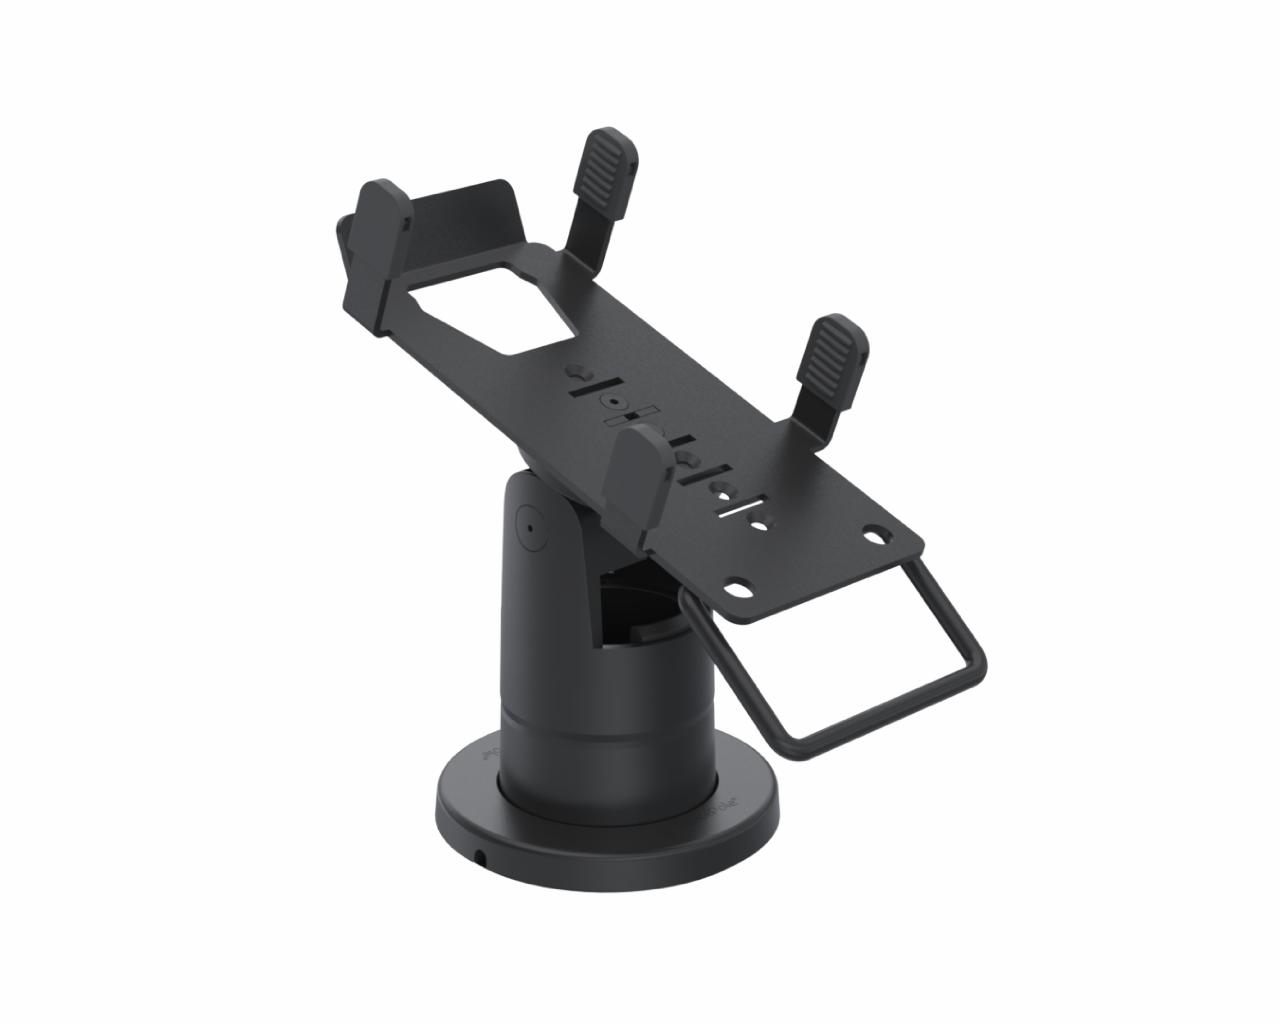 SpacePole Stack with MultiGrip plate for Verifone X990